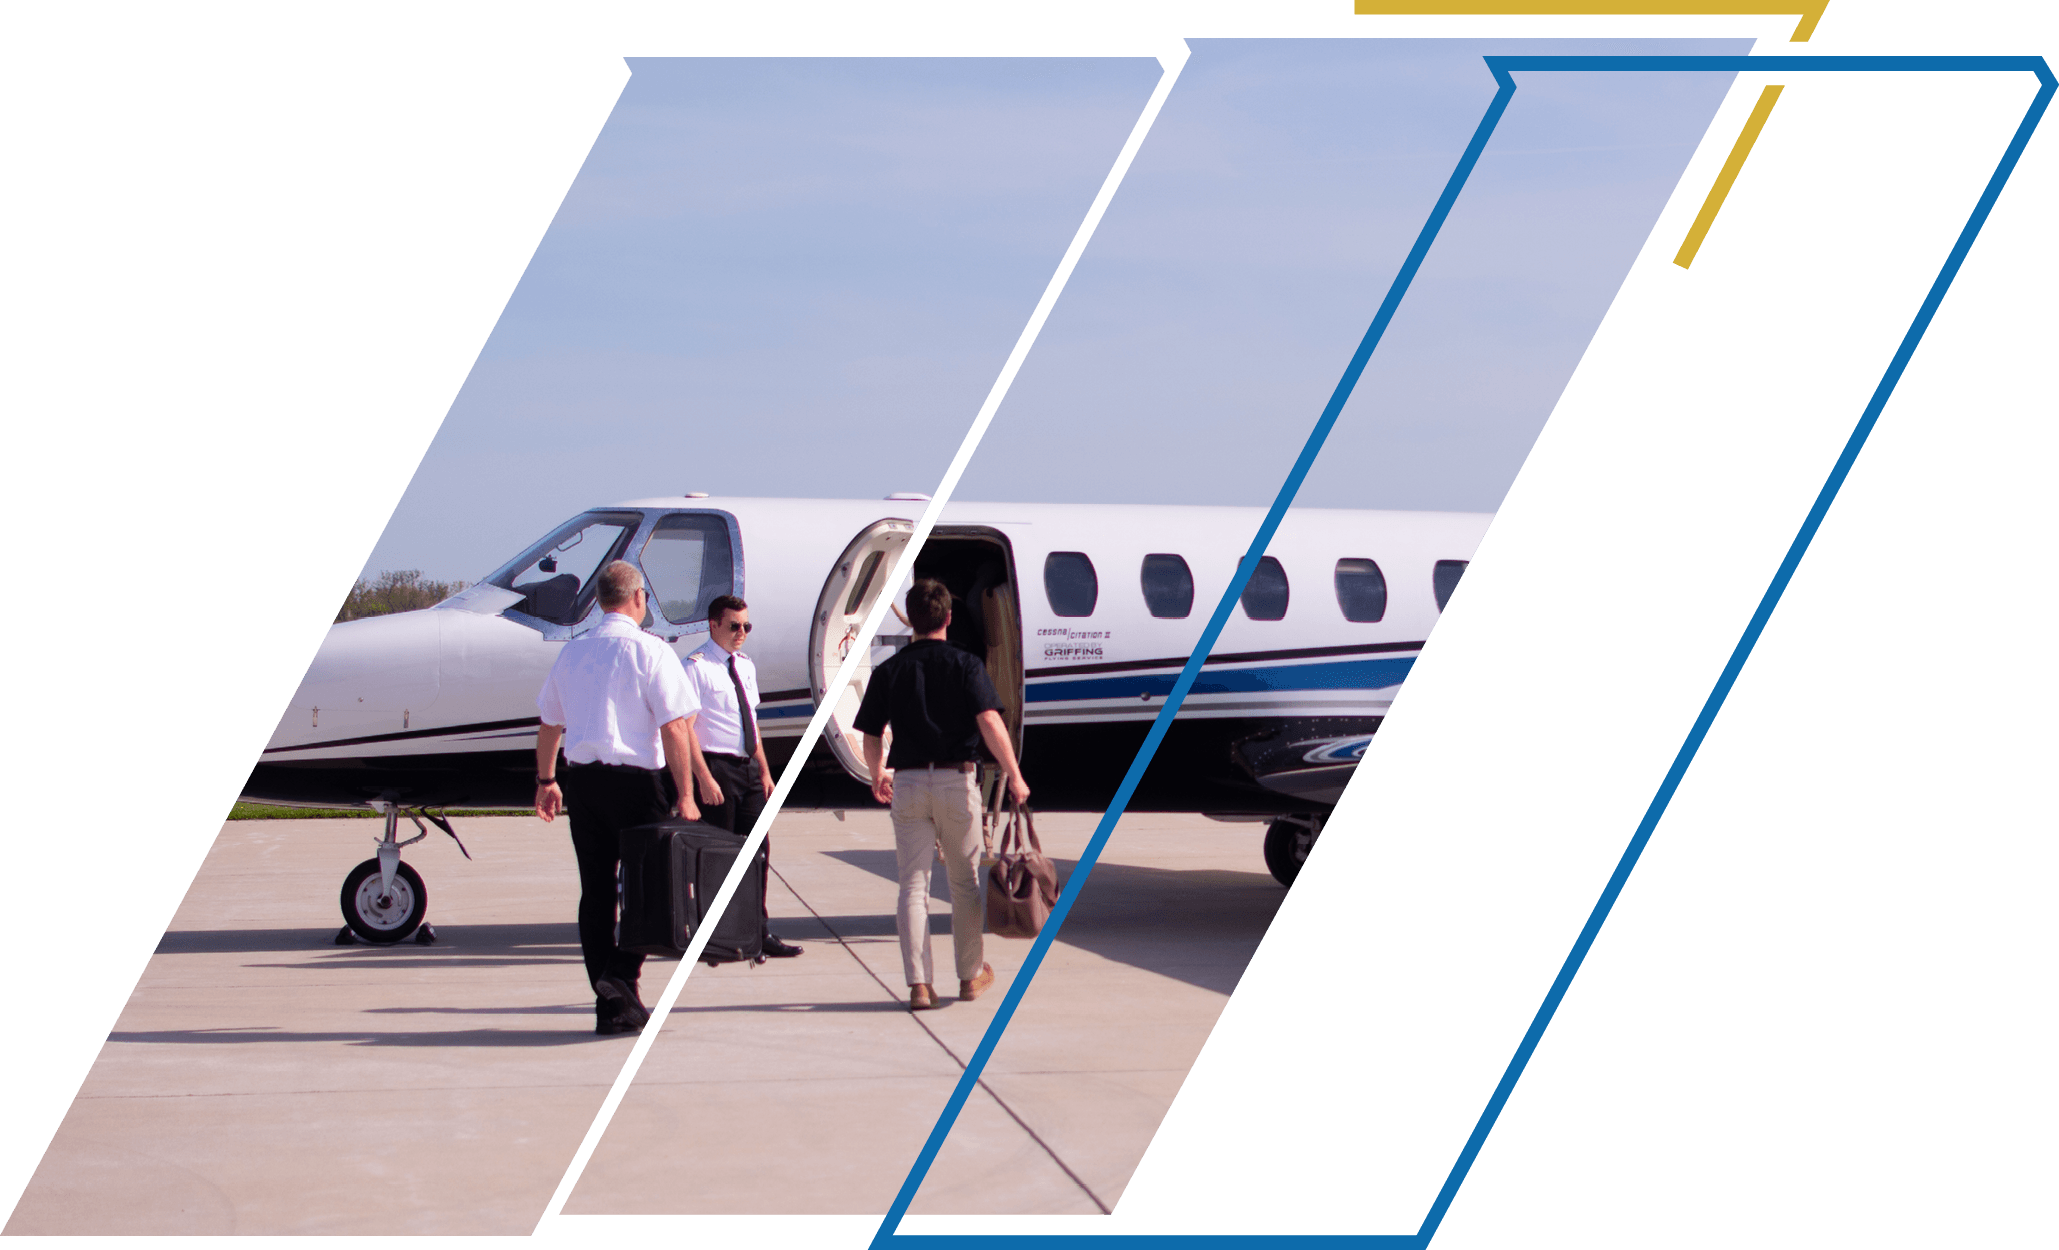 Private plane/jet charters provide convenience & flexibility not found with commercial airlines